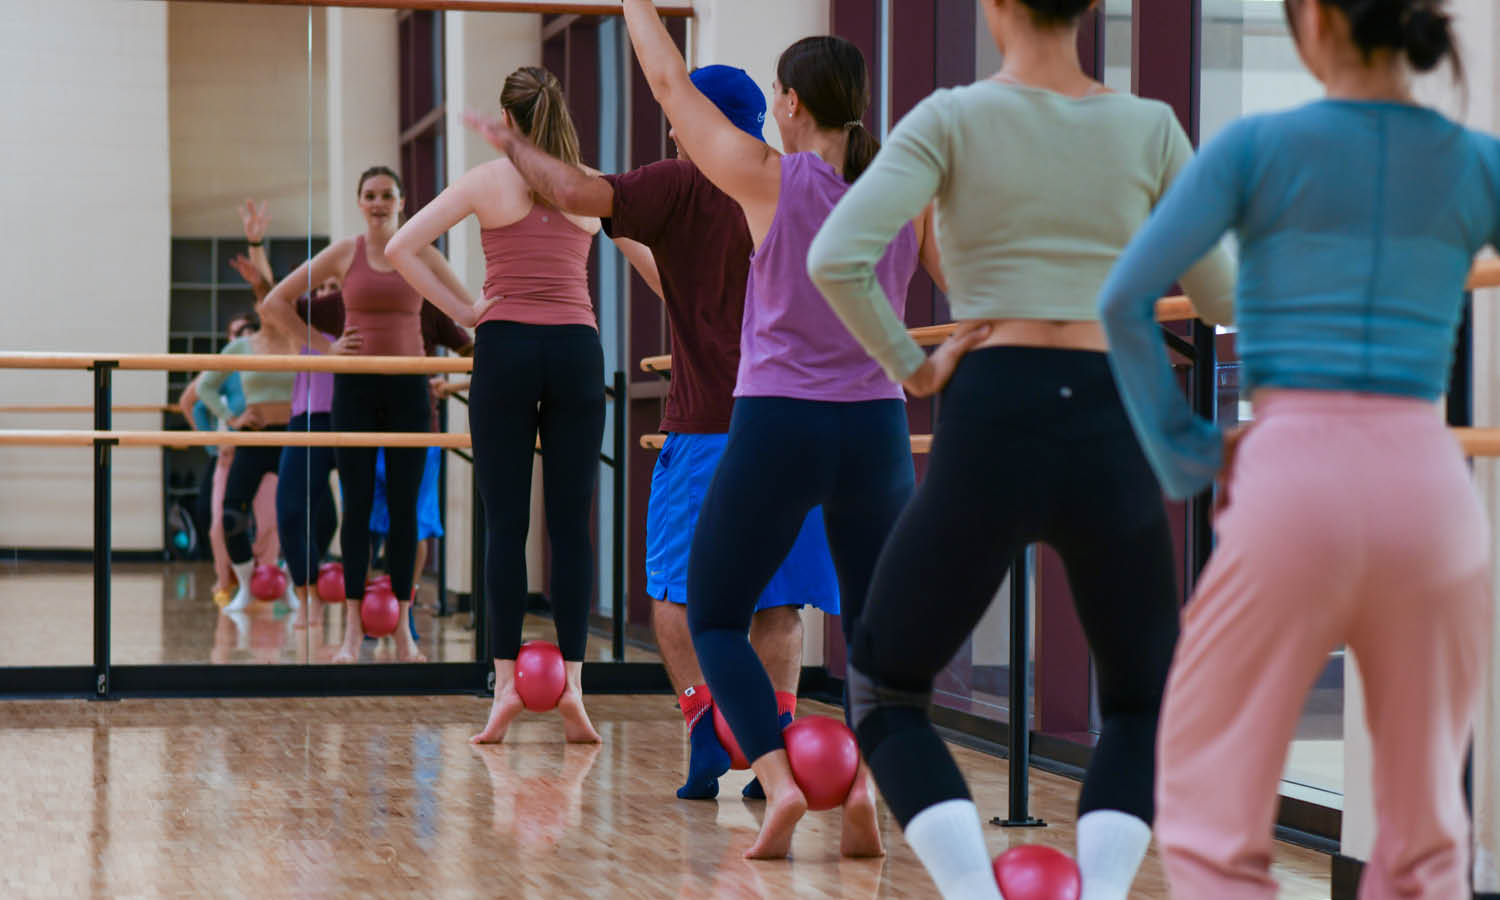 Jan. 17 - 22: All Group RecXercise Classes are FREE